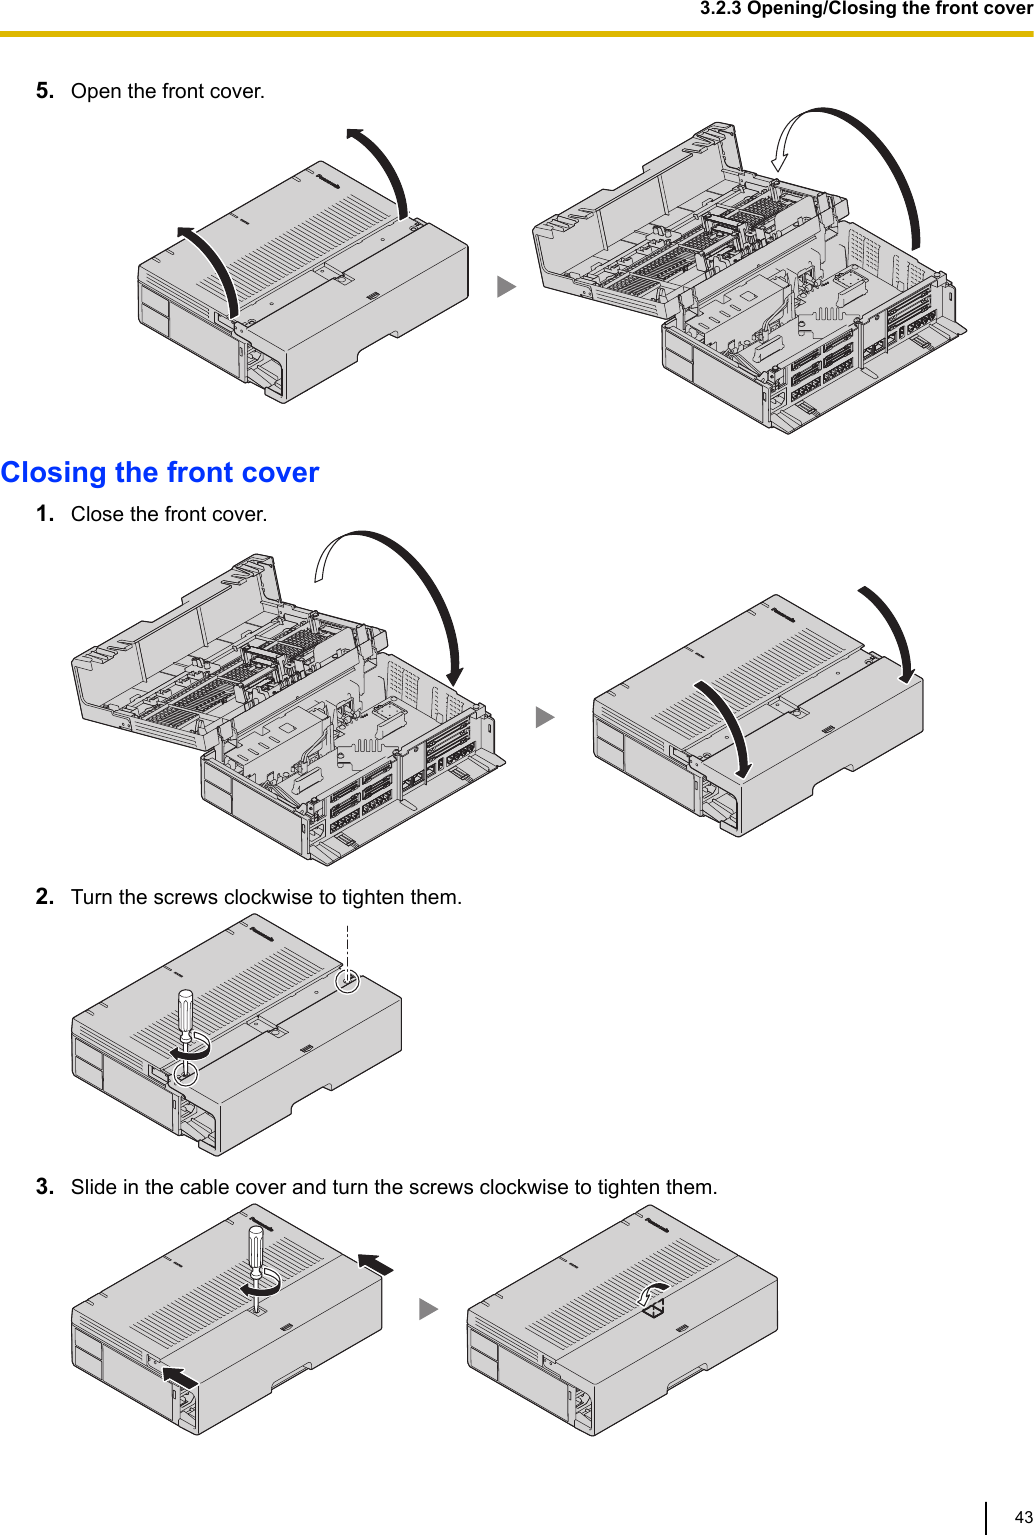 5. Open the front cover.Closing the front cover1. Close the front cover.2. Turn the screws clockwise to tighten them.3. Slide in the cable cover and turn the screws clockwise to tighten them.3.2.3 Opening/Closing the front cover43